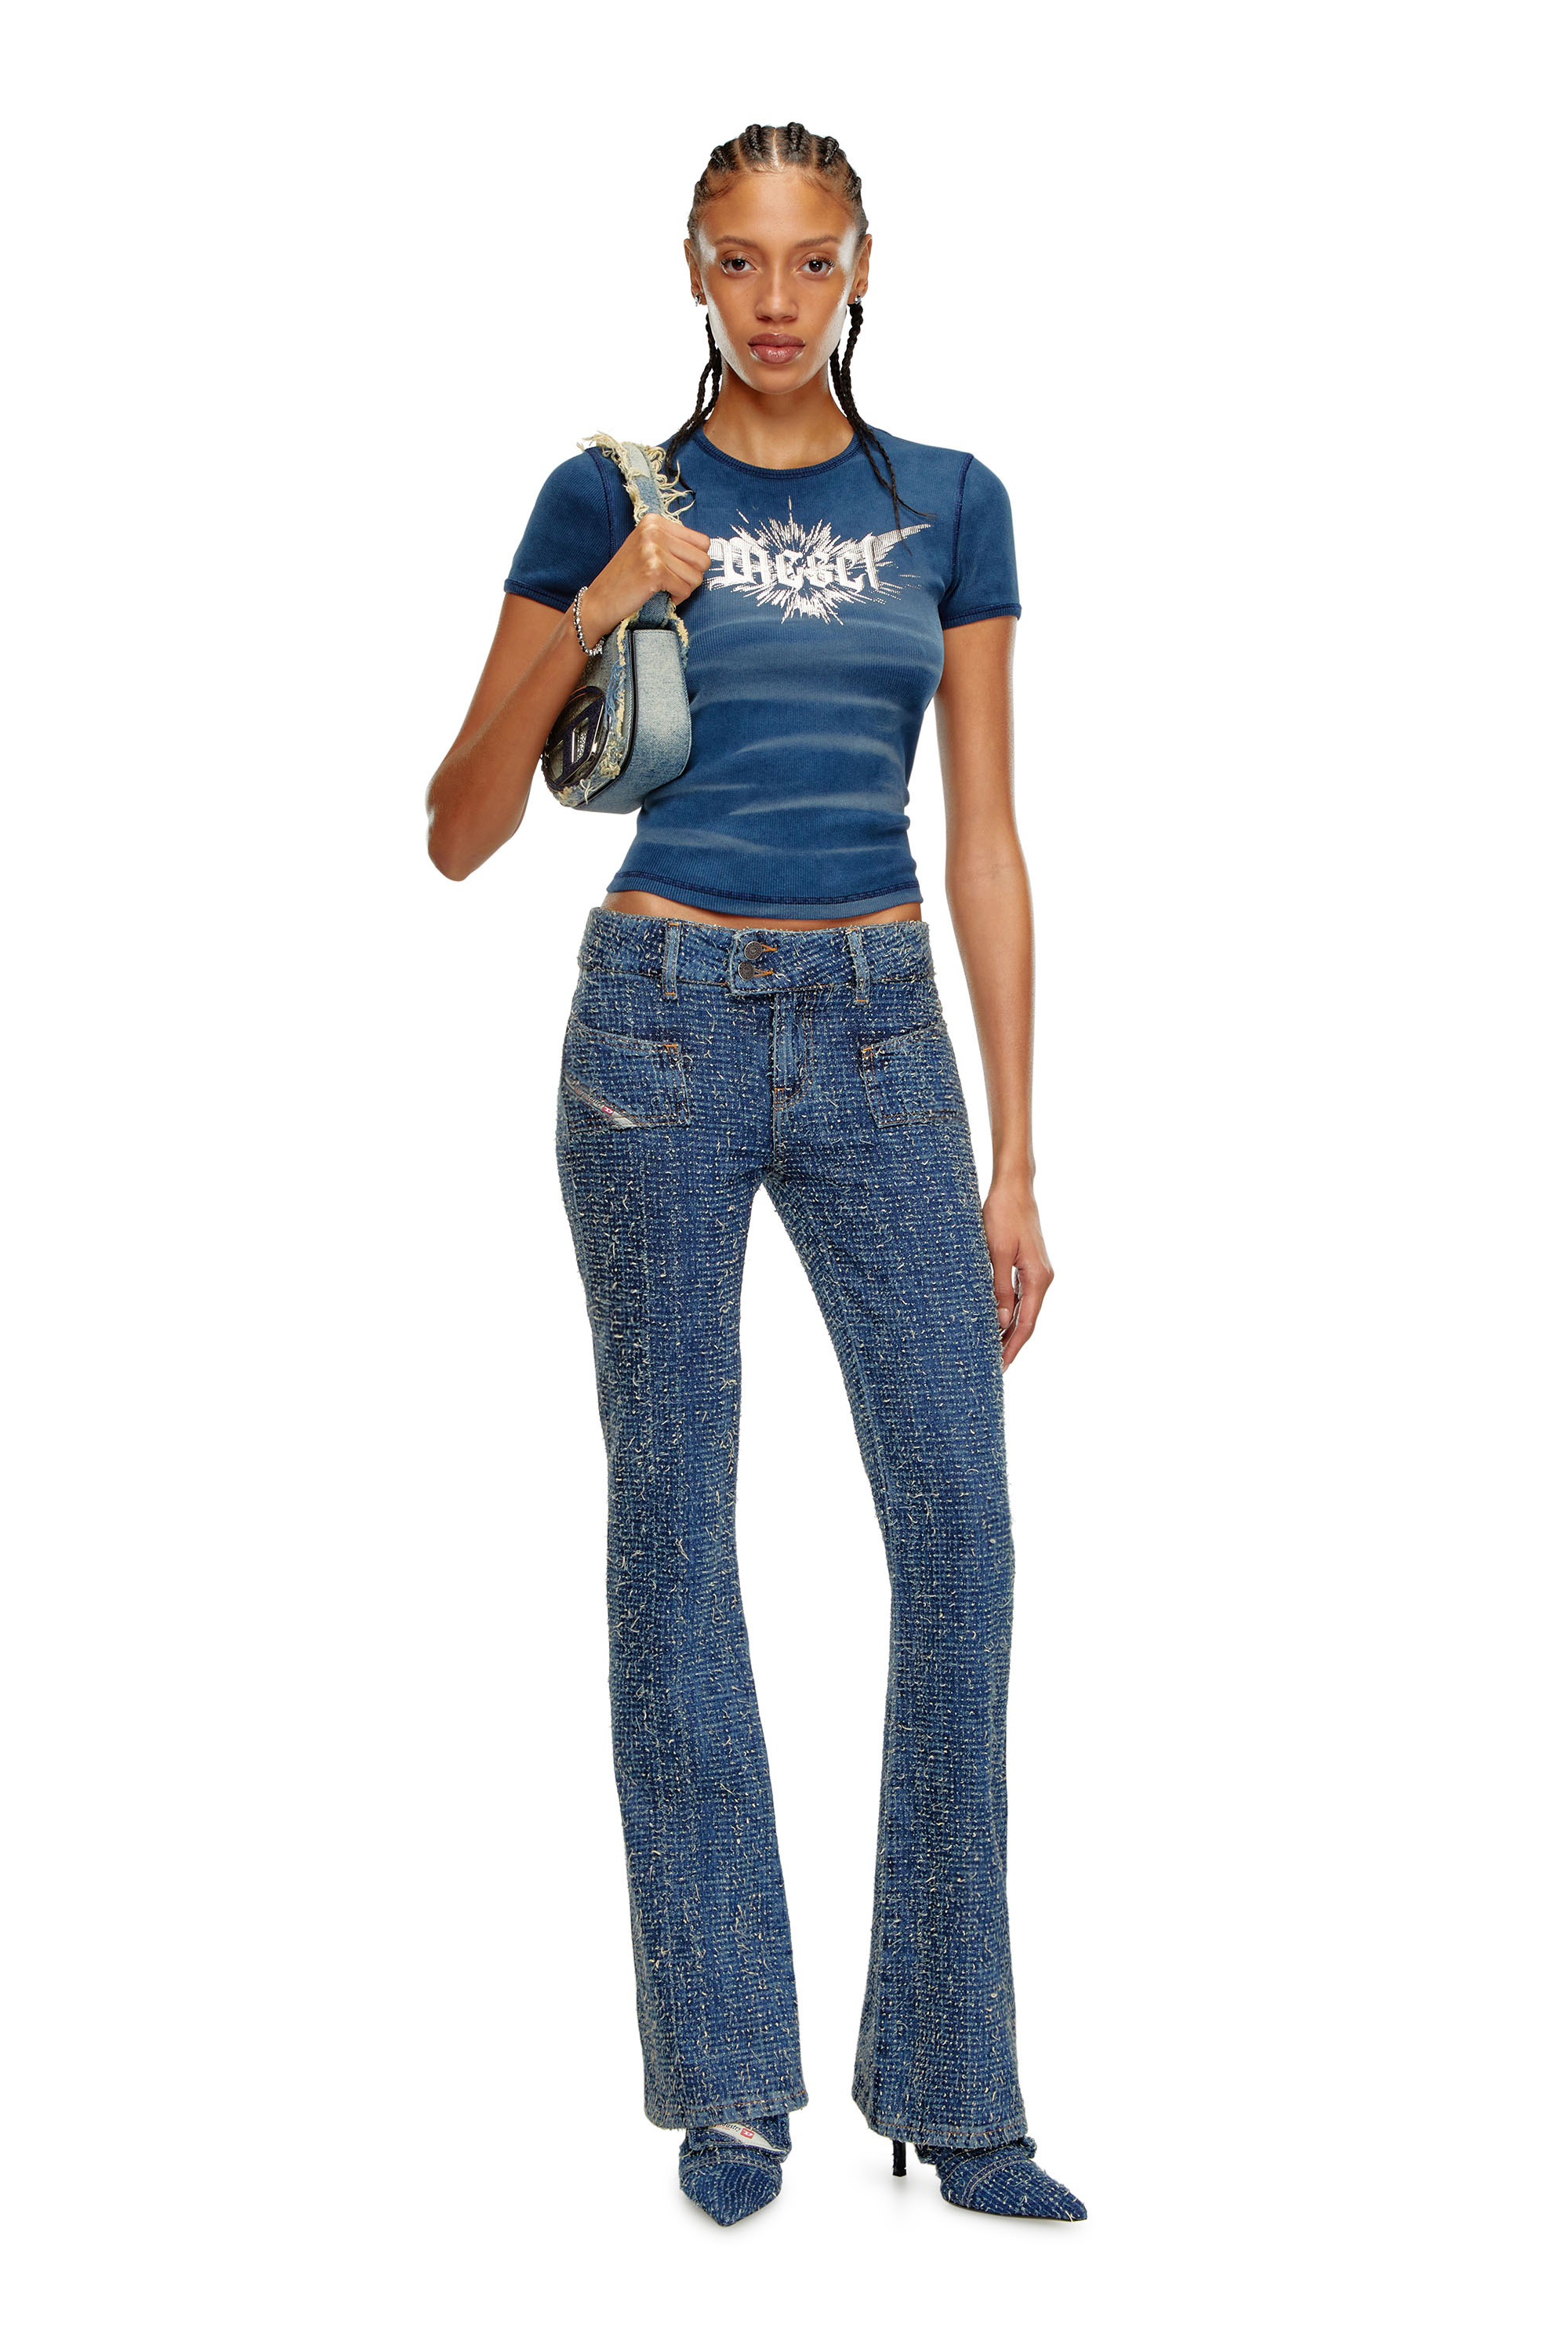 Diesel - Bootcut and Flare Jeans D-Ebush 0PGAH, Mujer Bootcut y Flare Jeans - D-Ebush in Azul marino - Image 1